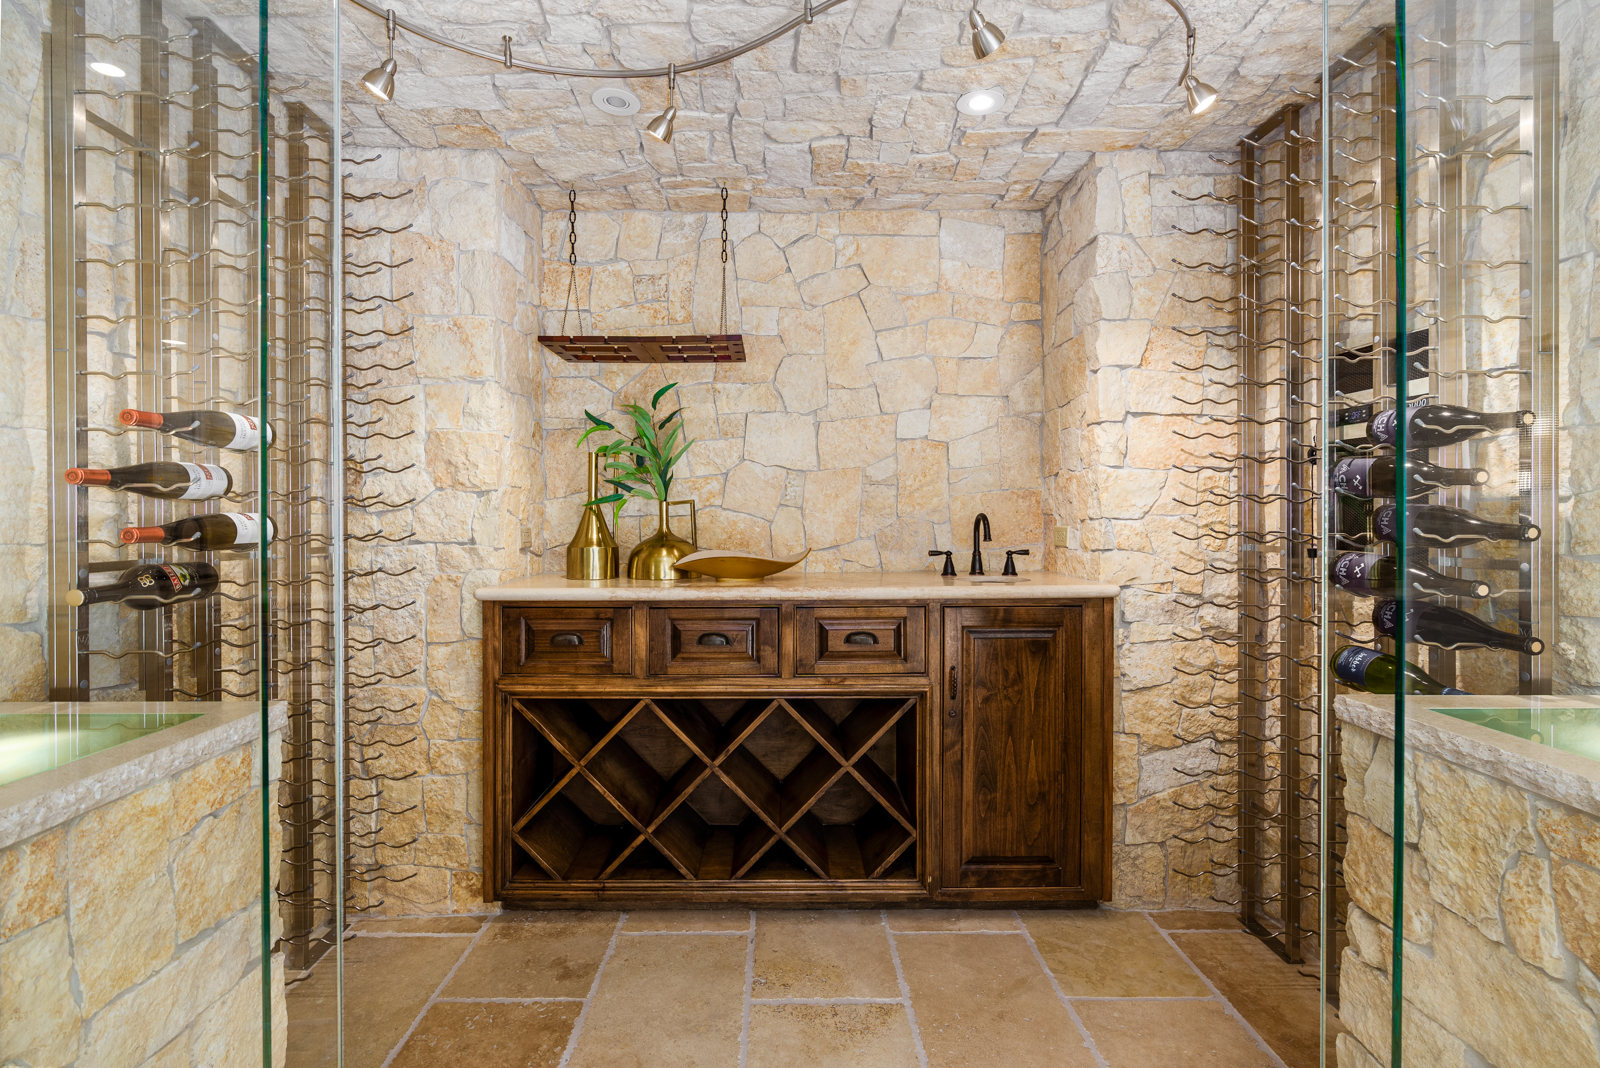 Temperature-controlled wine room with stone walls. 